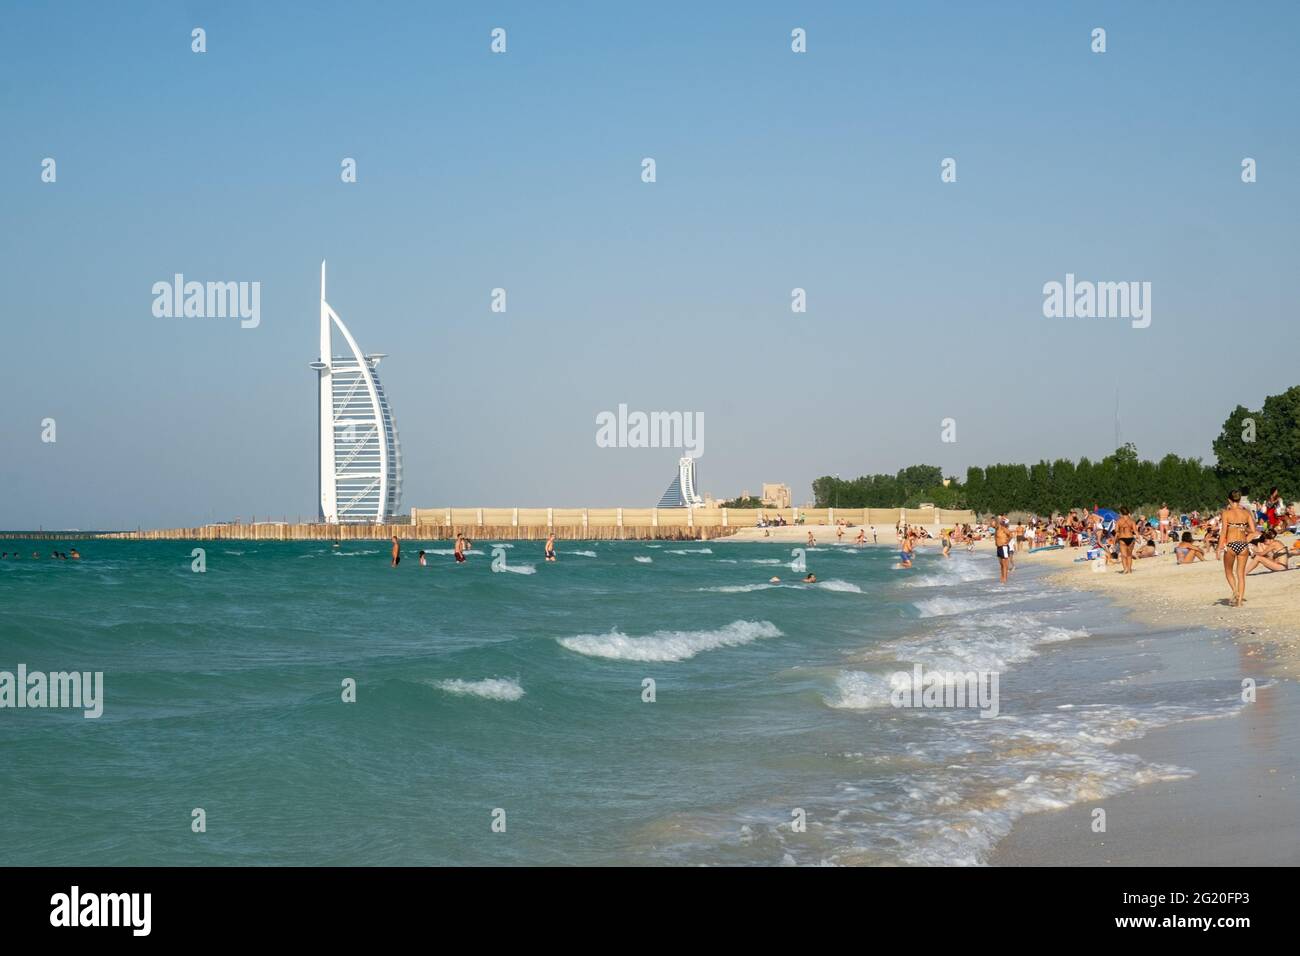 People on the beach  with the white sail of Burj Al Arab visible in the distance. Dubai, UAE. Stock Photo